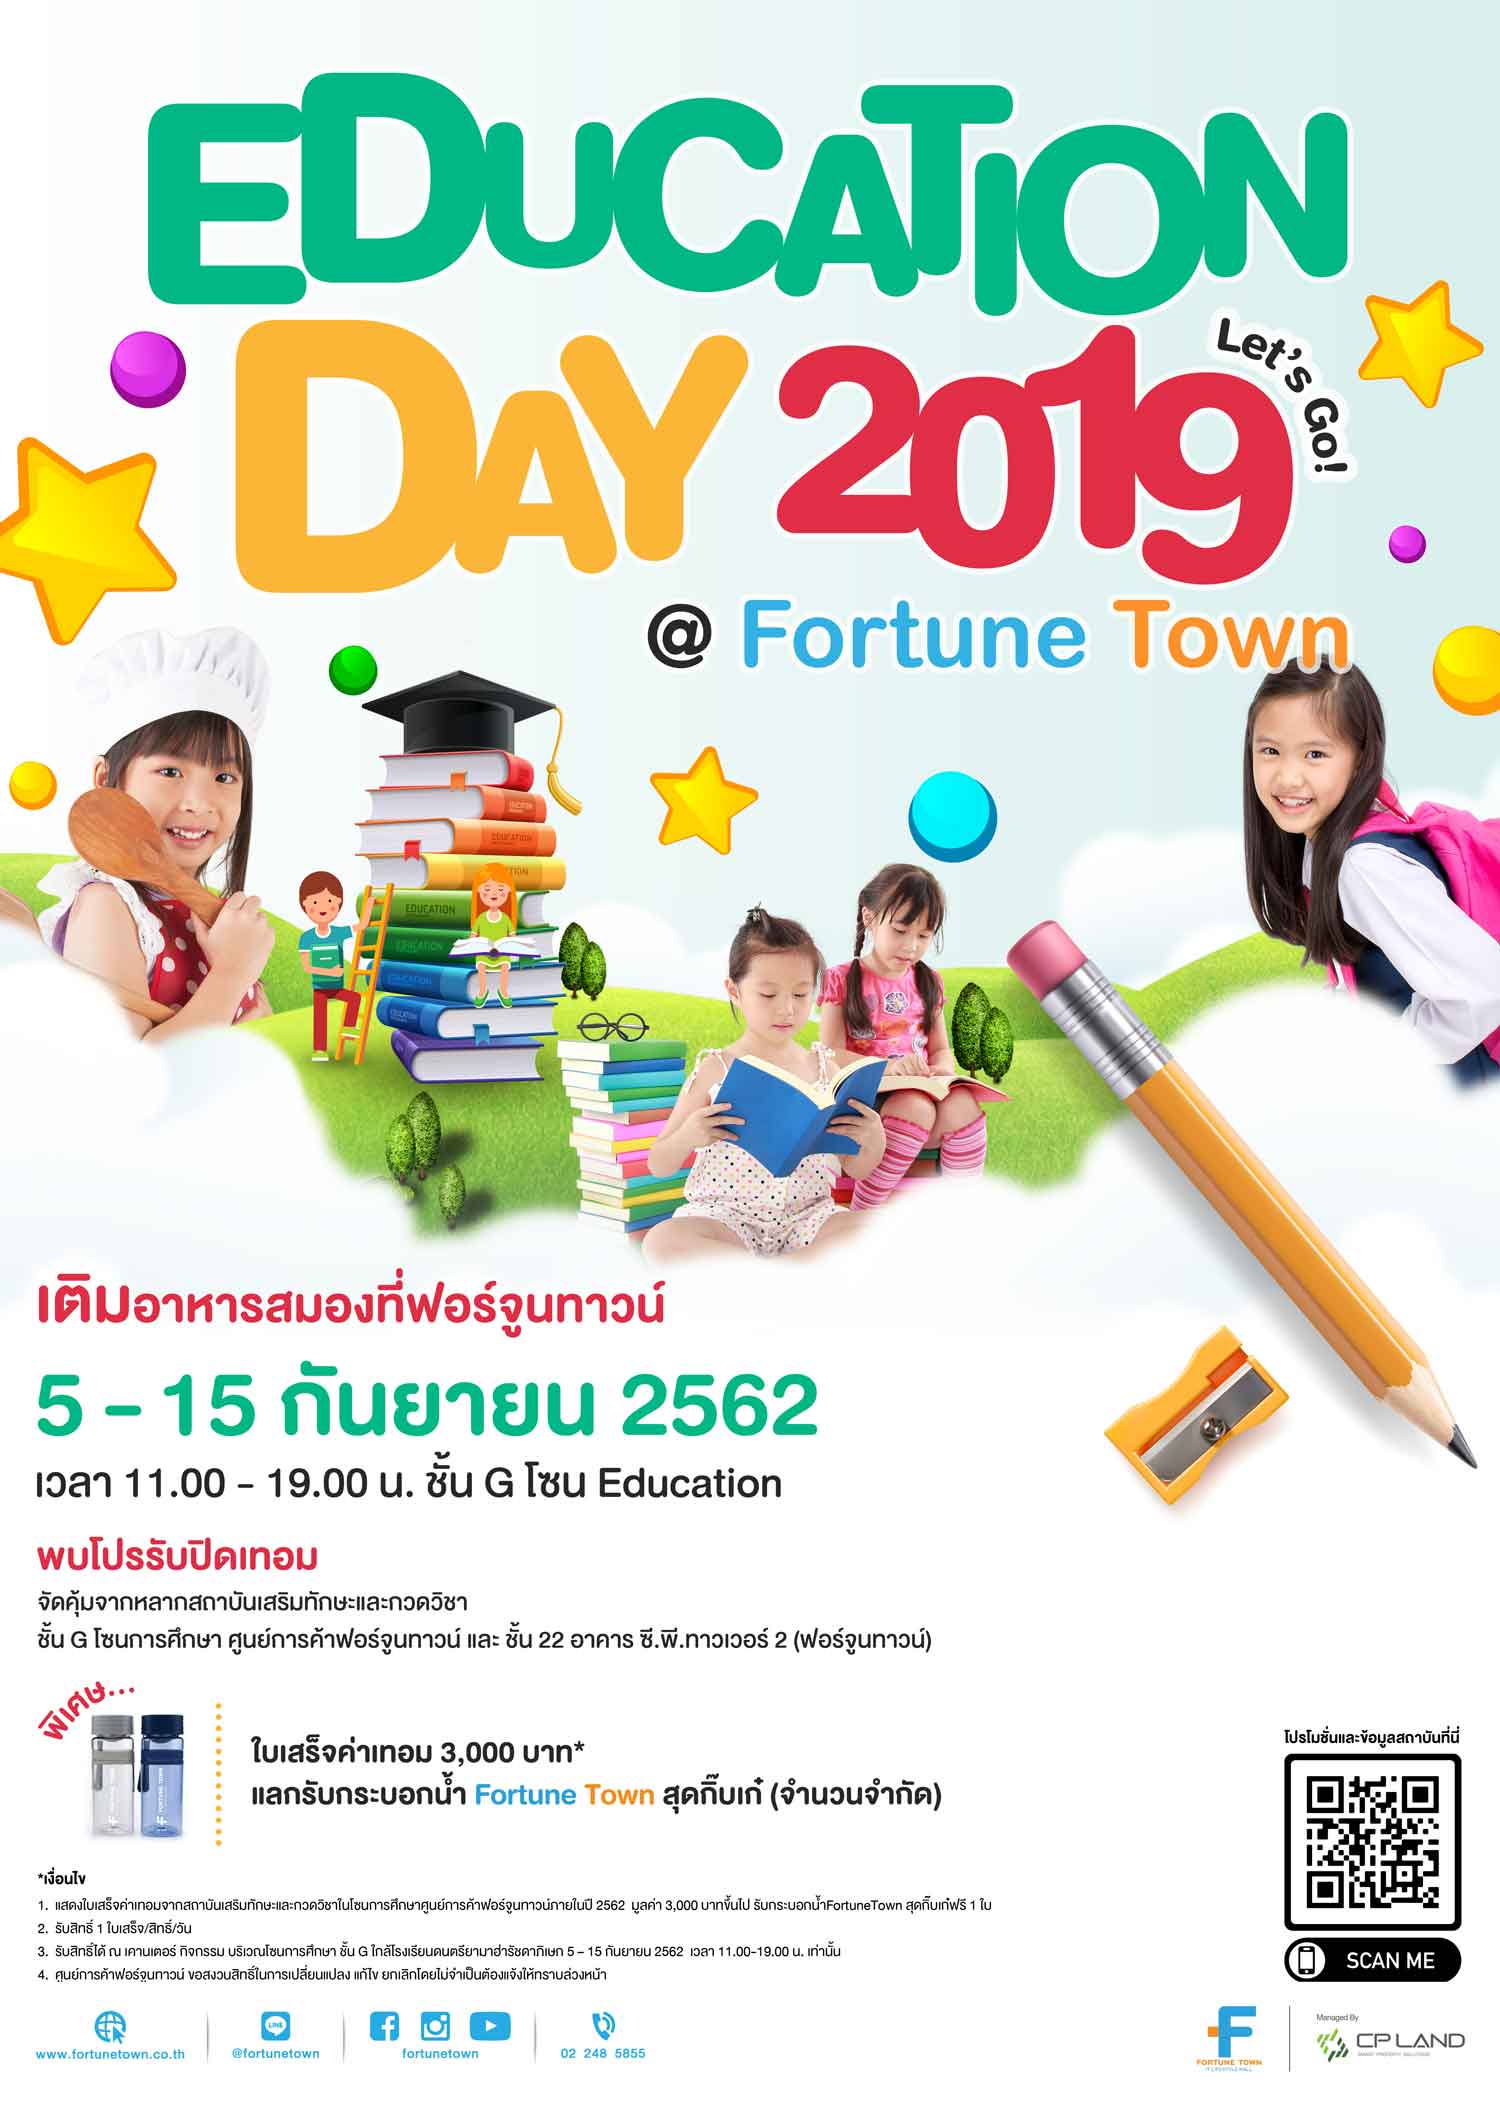 Education Day 2019 @ FortuneTown : Let´s GO